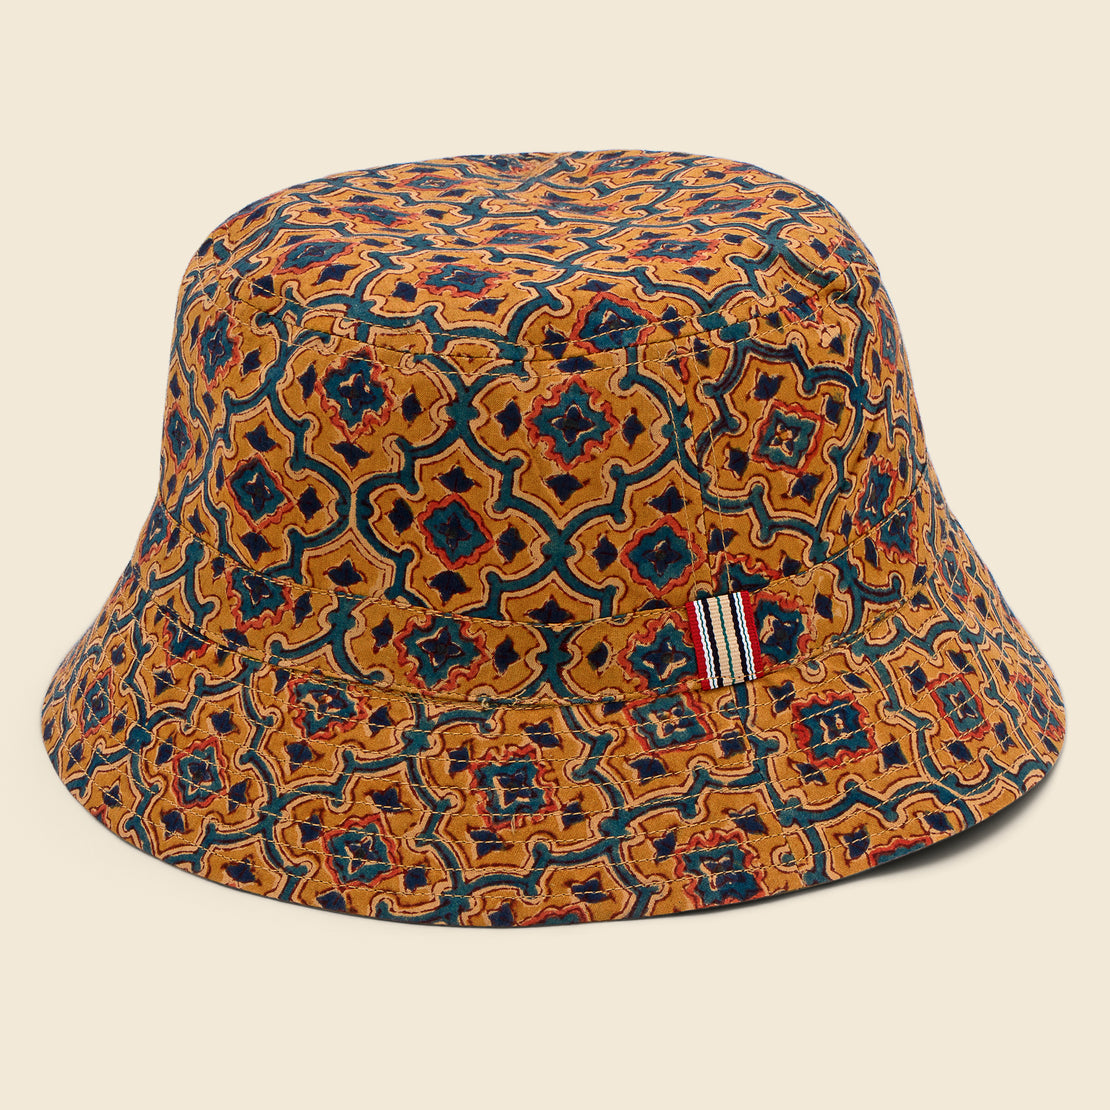 Reversible Floral/Tile Print Bucket Hat - Brown Multi - Kardo - STAG Provisions - Accessories - Hats